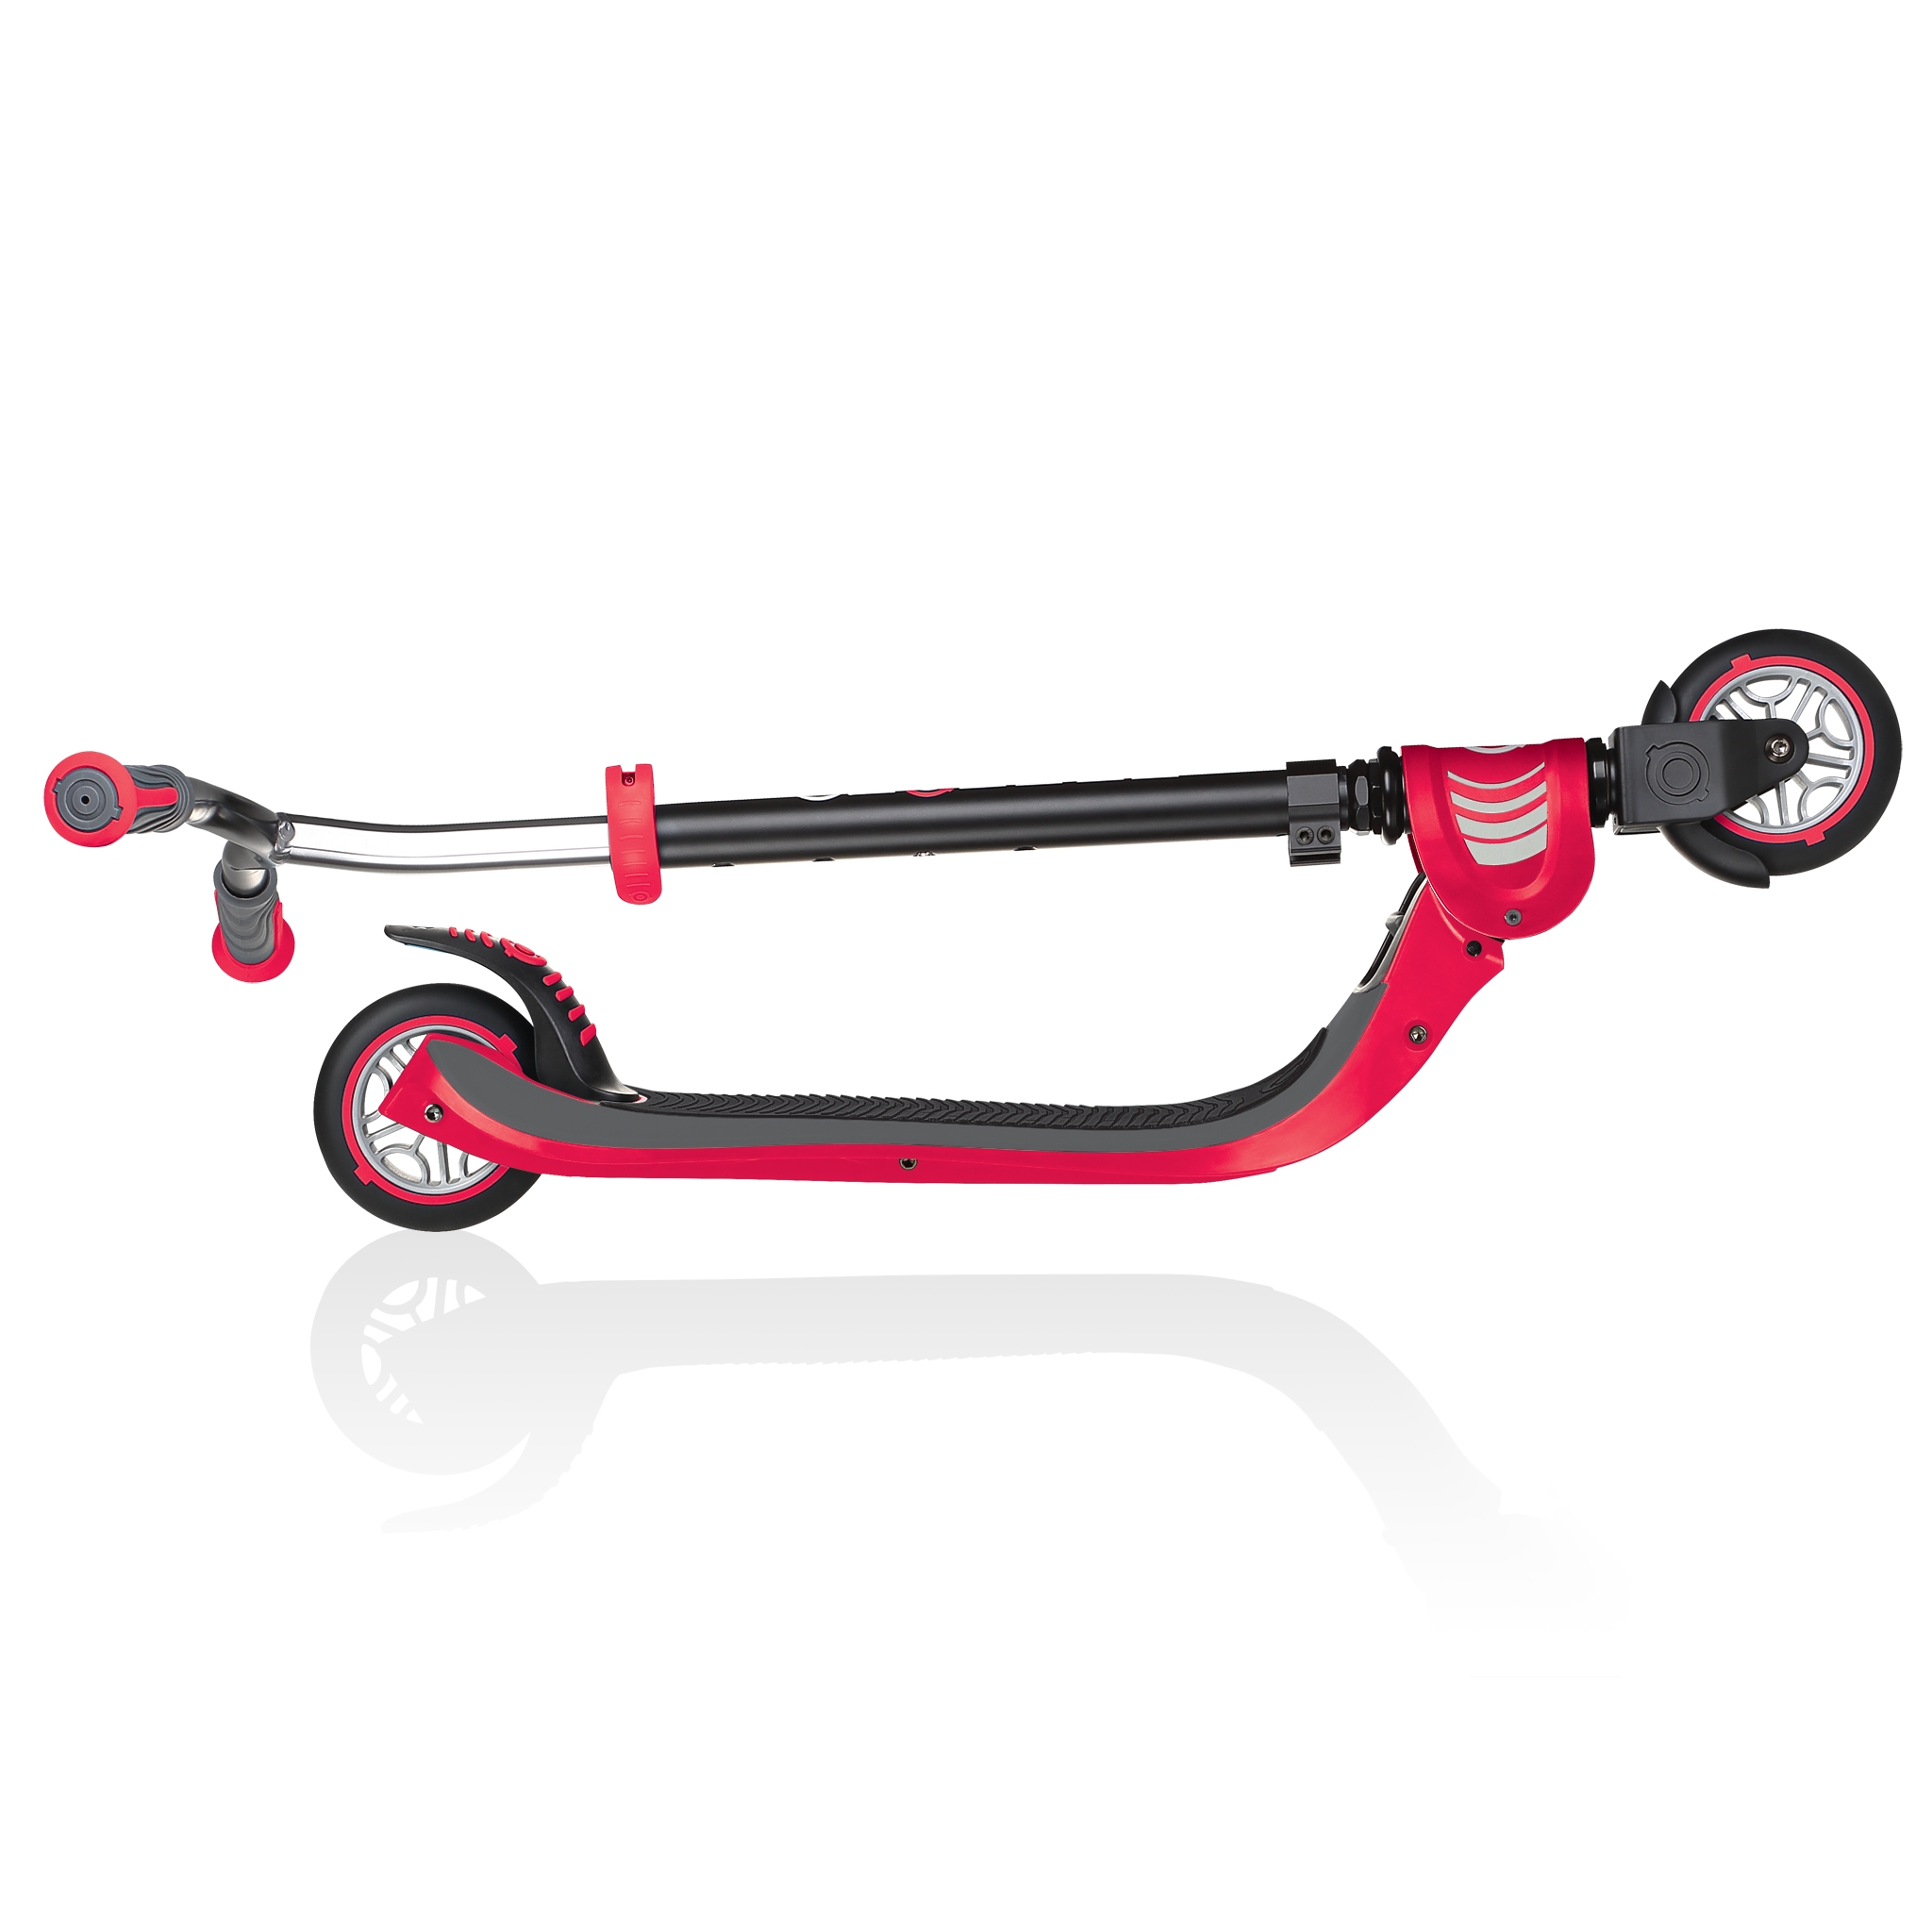 FLOW-FOLDABLE-125-2-wheel-foldable-scooter-for-kids-new-red 1